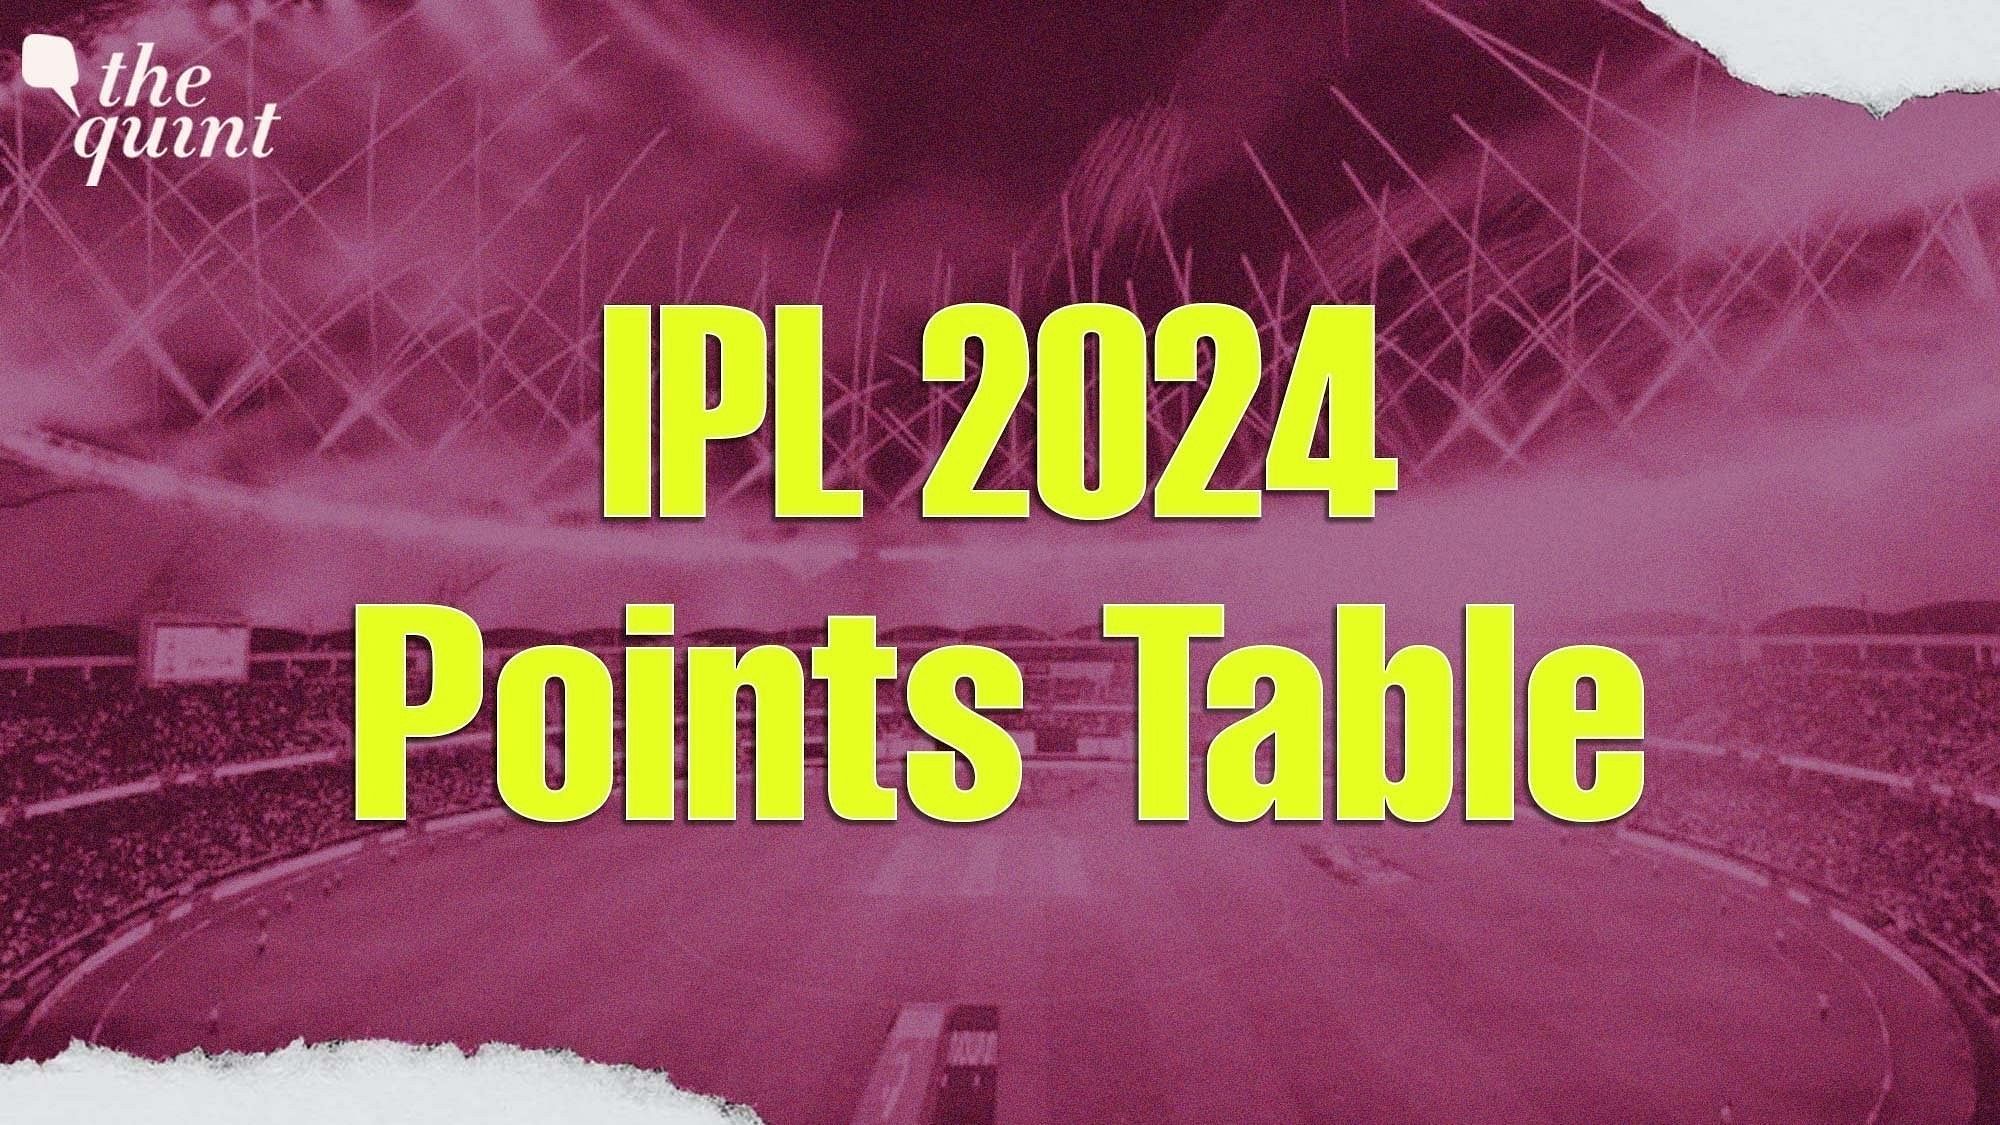 <div class="paragraphs"><p>IPL 2024 Points Table: Know the top teams after the KKR vs RR match on Tuesday, 16 April.</p></div>